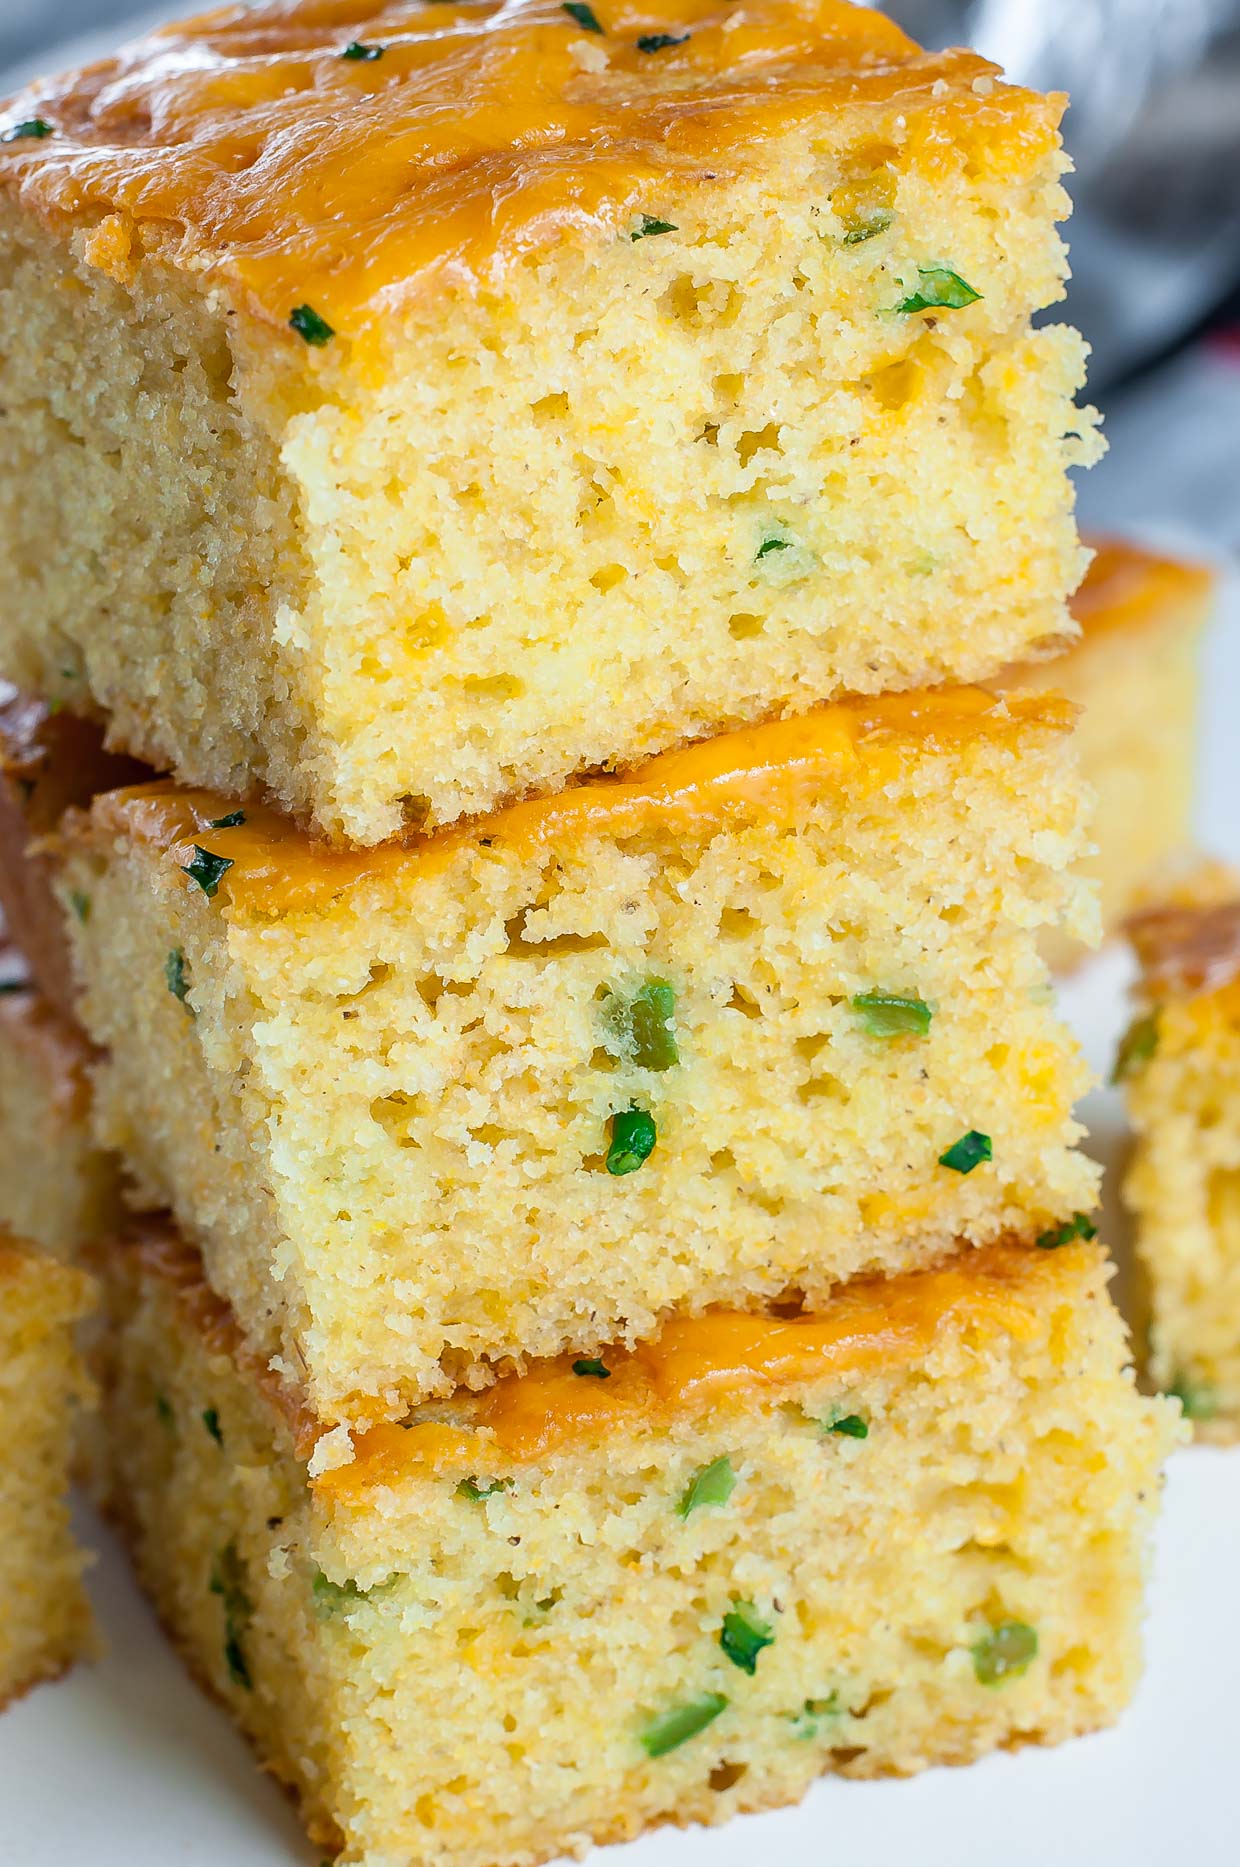 We love this Fuffy Jalapeño Cheddar Cornbread! This crazy good cornbread gets a leg up from two classic mix-ins: ooey gooey cheddar cheese and fiery jalapeño. The result is a kiss of heat blanketed by cheesy cornbread goodness.